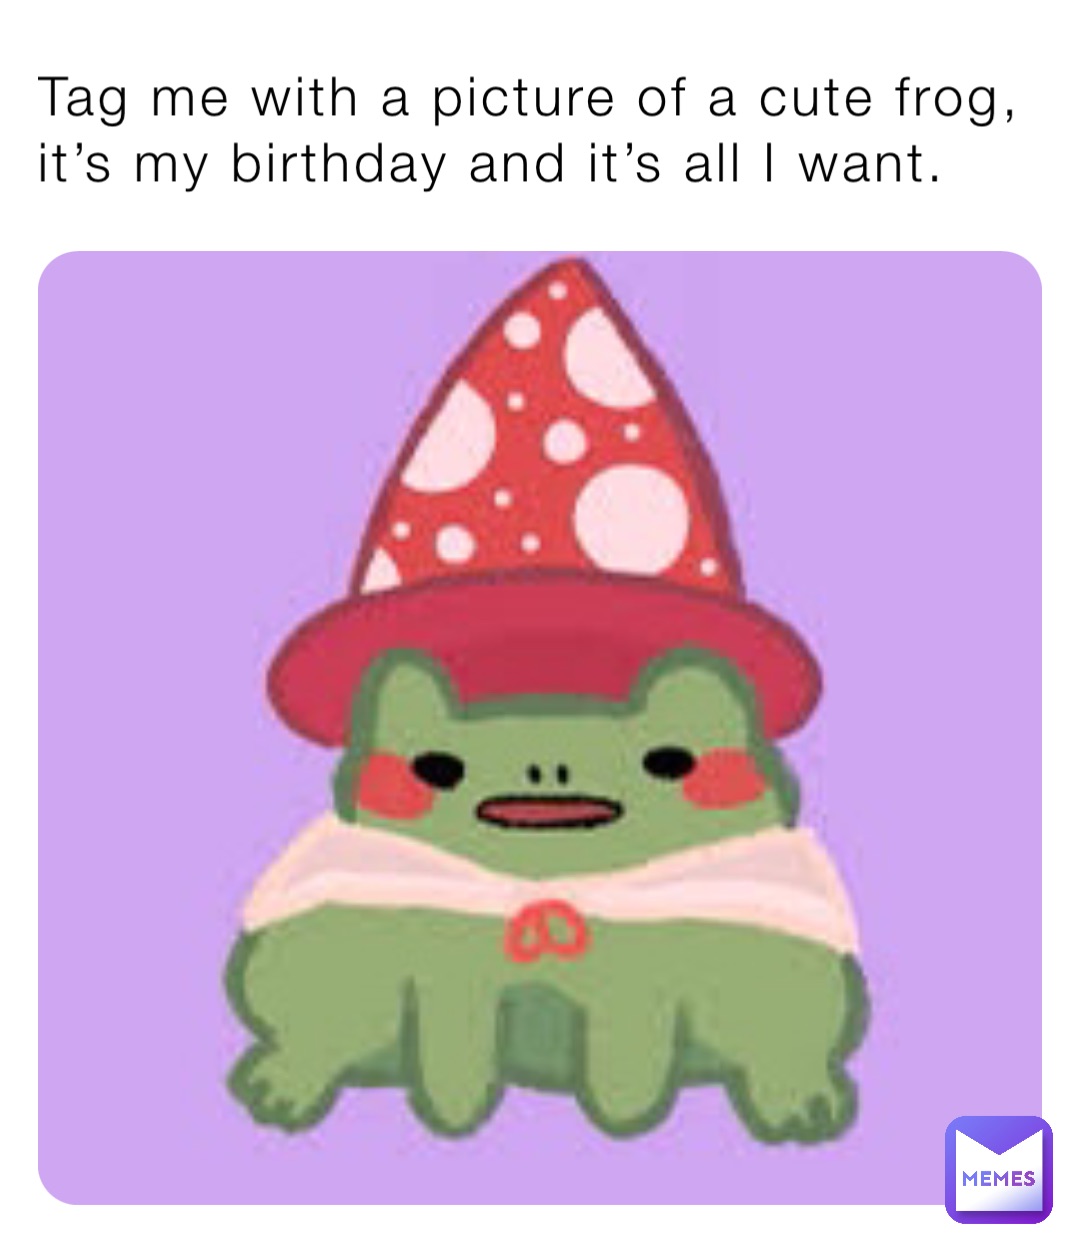 Tag me with a picture of a cute frog, it’s my birthday and it’s all I want.